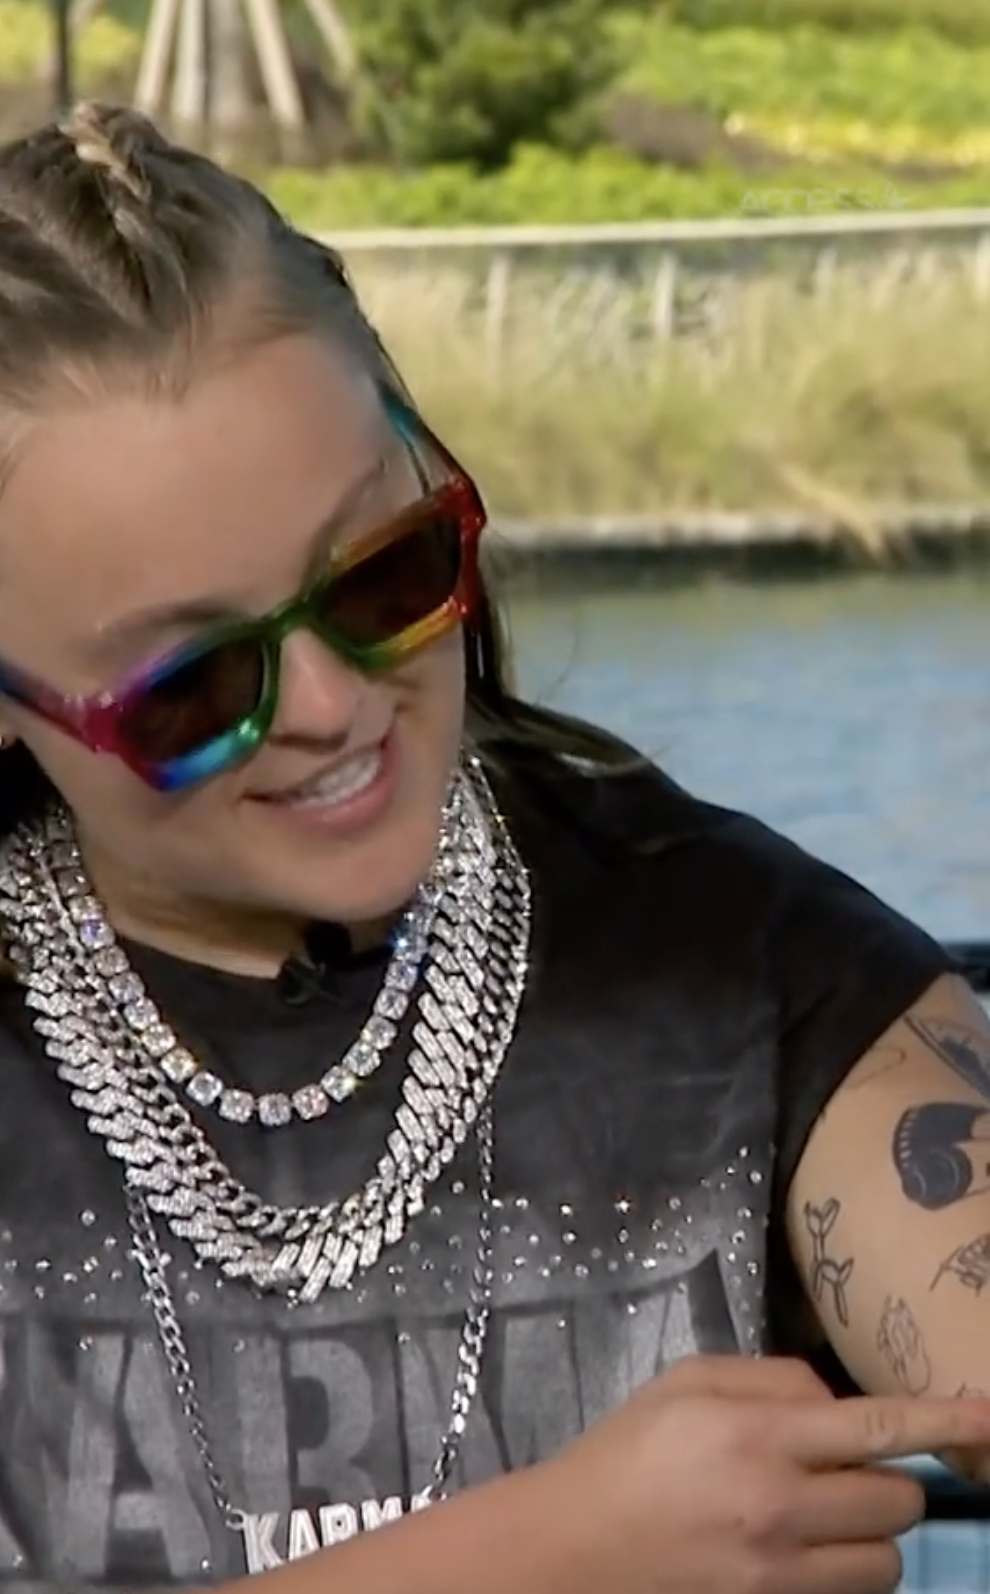 A person wearing large sunglasses, a T-shirt, and multiple layered necklaces shows off tattoos on their arm